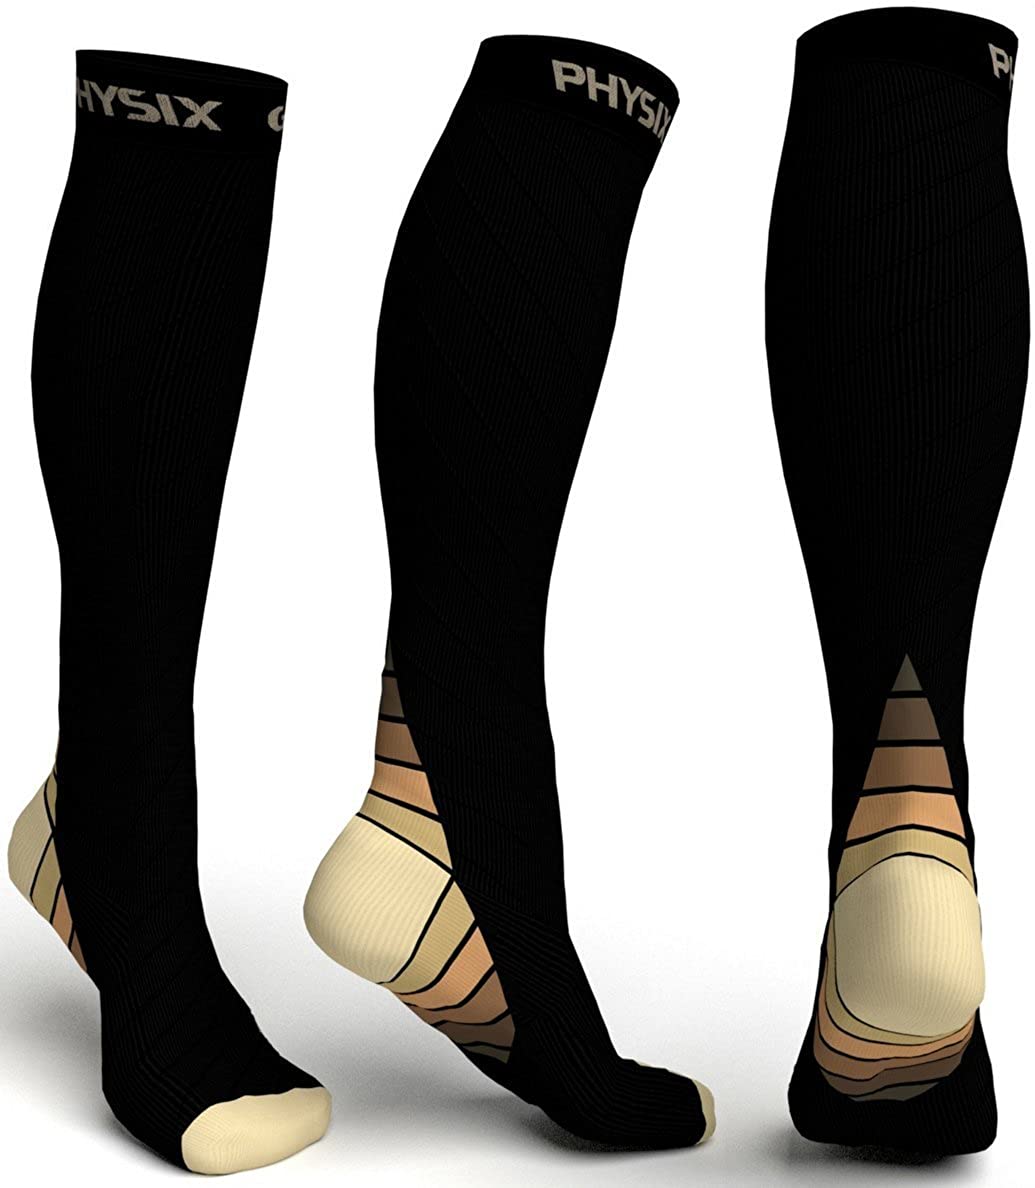 Improve Blood Flow While Working Out With These Cool Compression Socks for Men